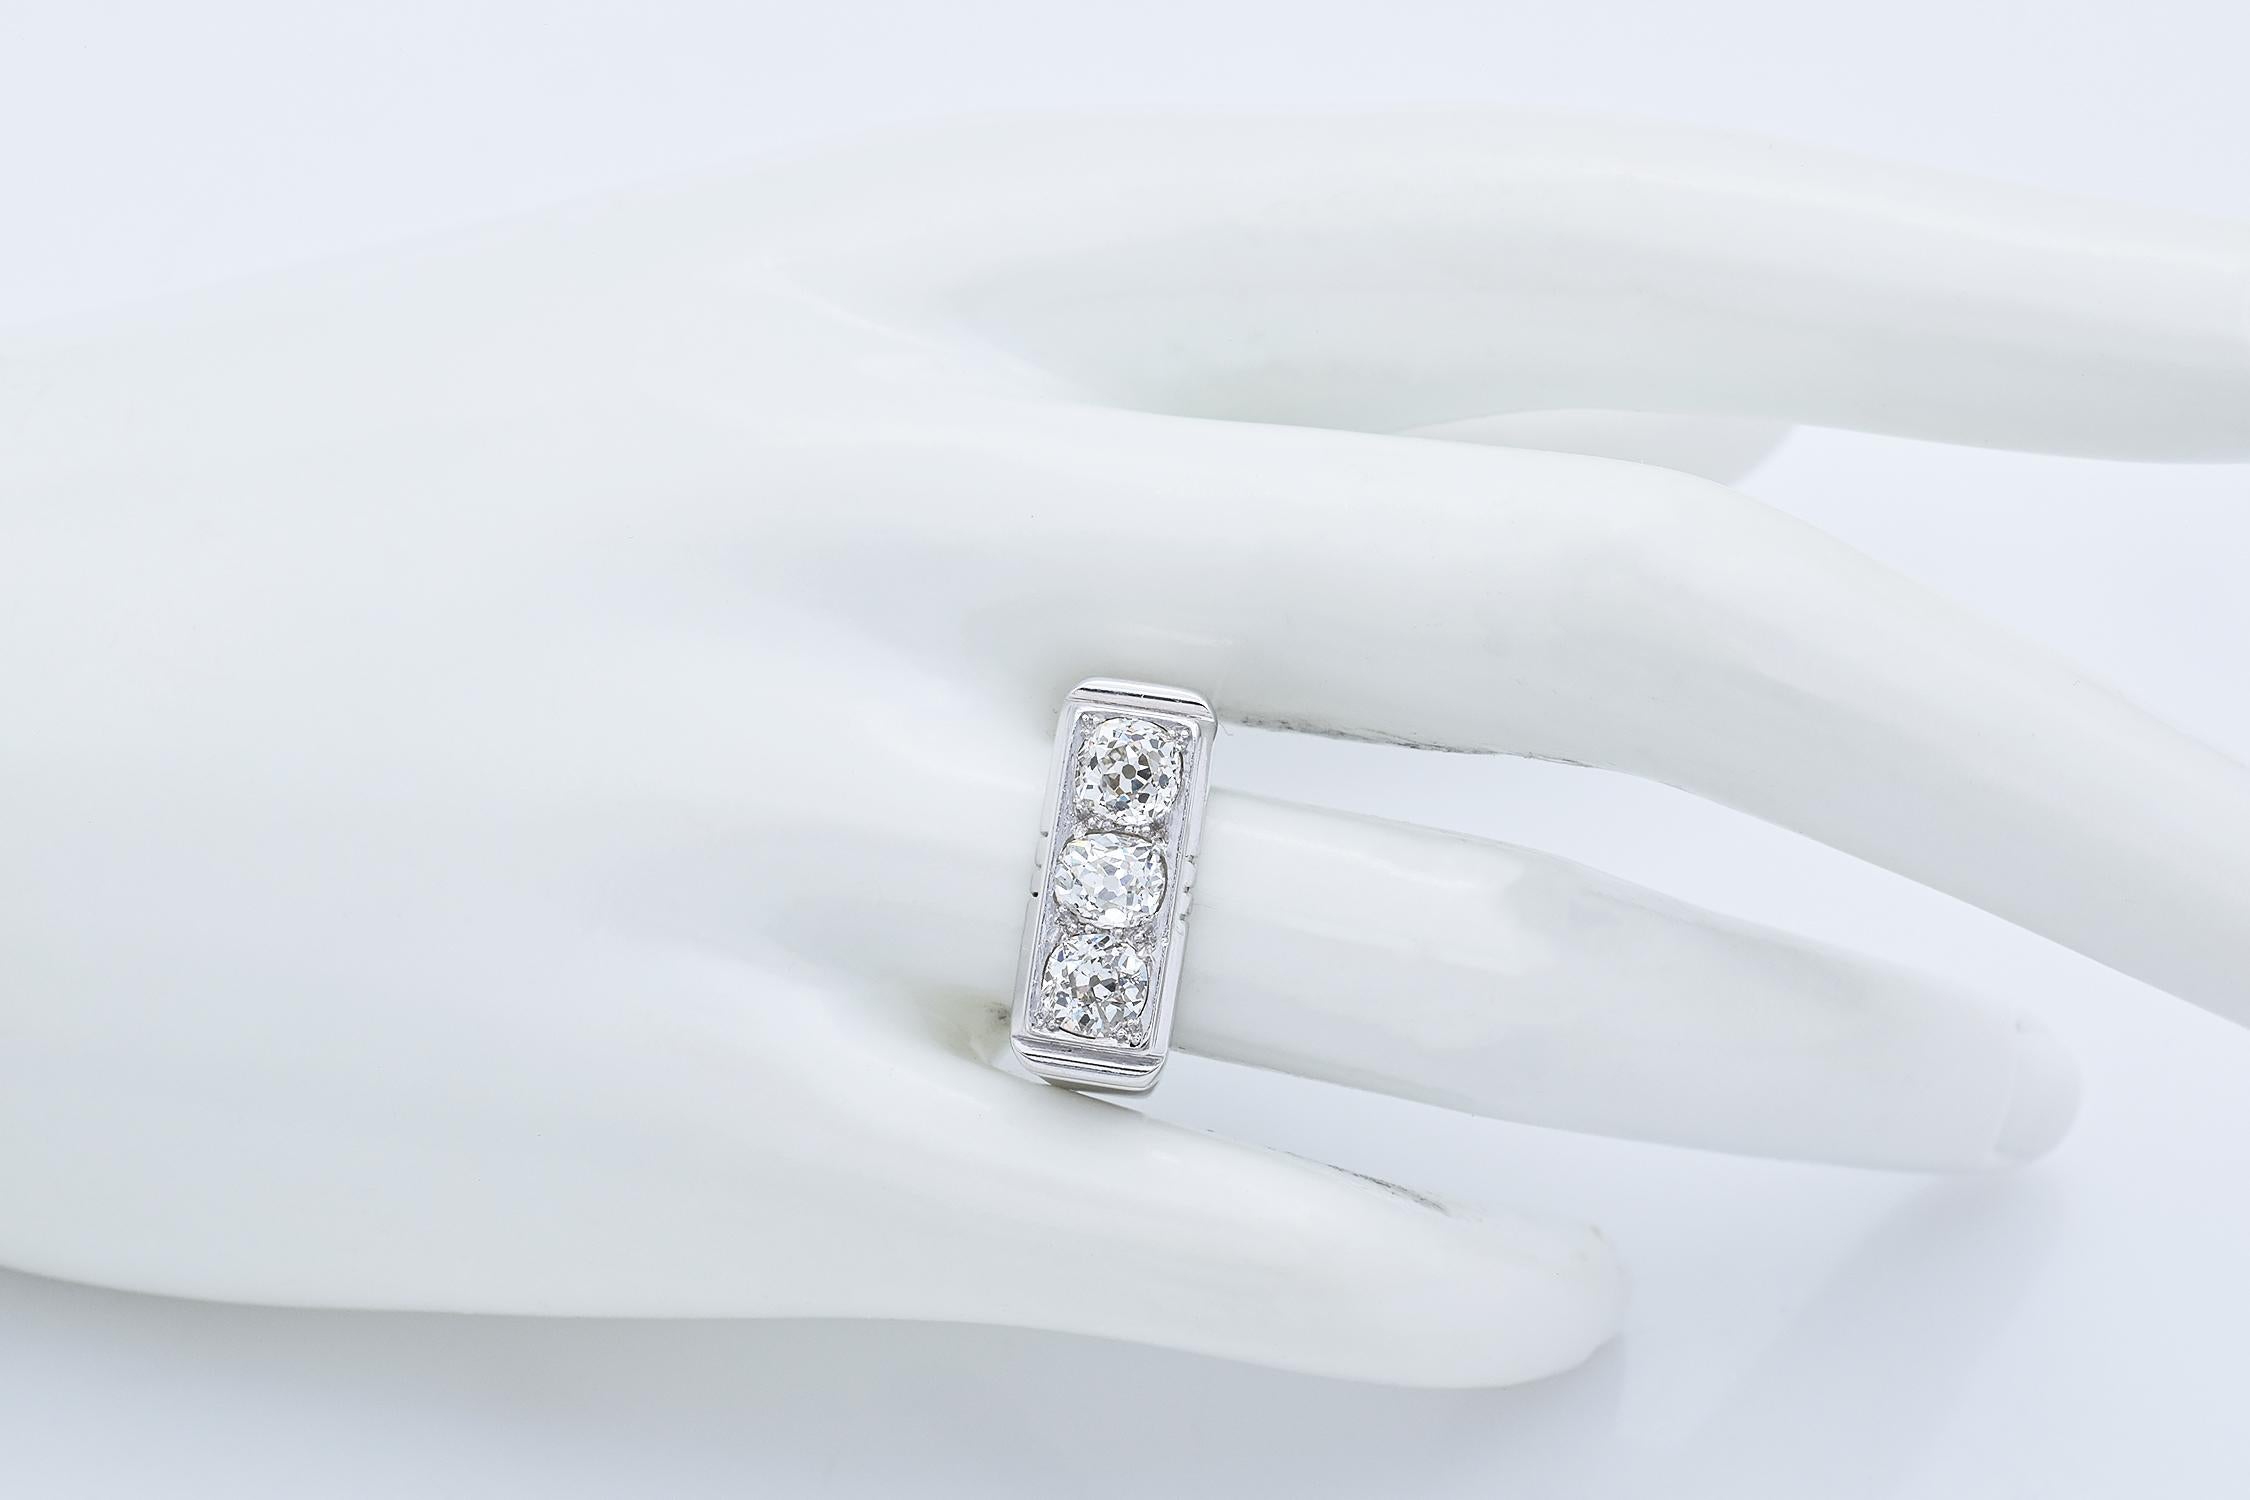 Vintage French Diamond White Gold 1.81 TCW Three-Stone Band Ring Size 7.25 For Sale 1